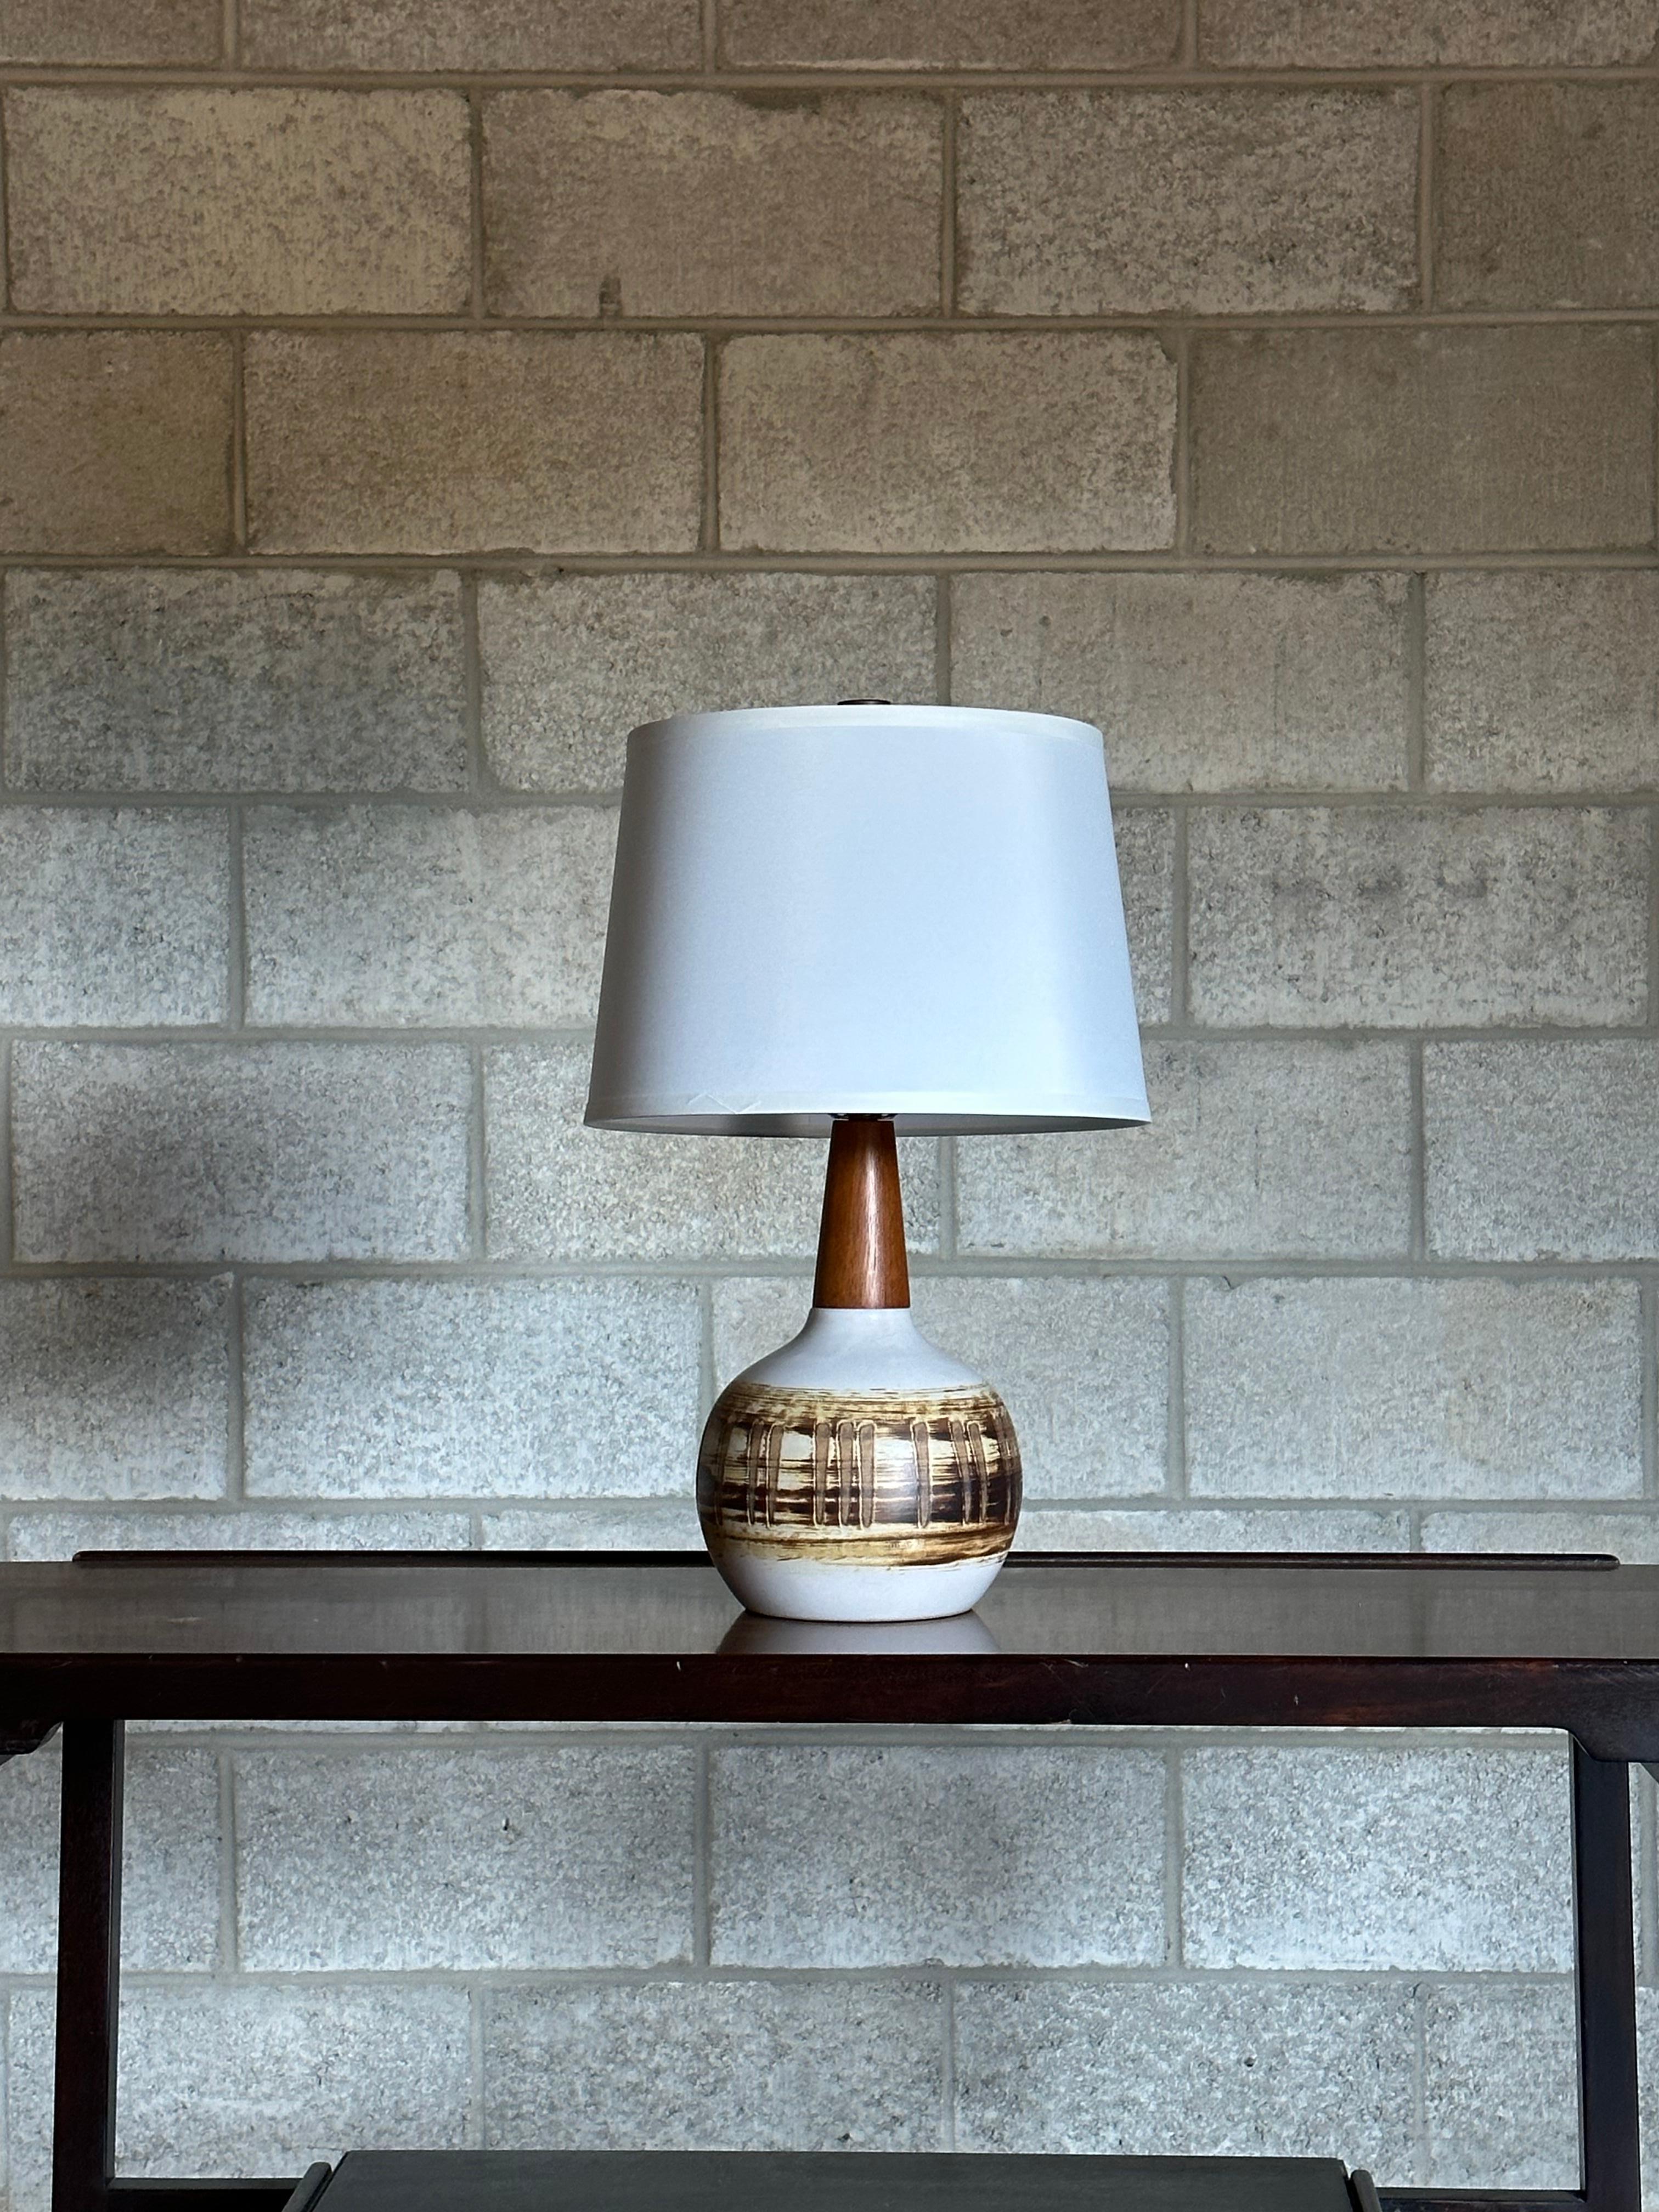 Table lamp designed by Jane and Gordon Martz for Marshall Studios. Featuring a bulbous ceramic body, accented with a long walnut neck, and finished with a walnut finial. A primarily white body with hues of yellow, tan, and brown. 

Overall